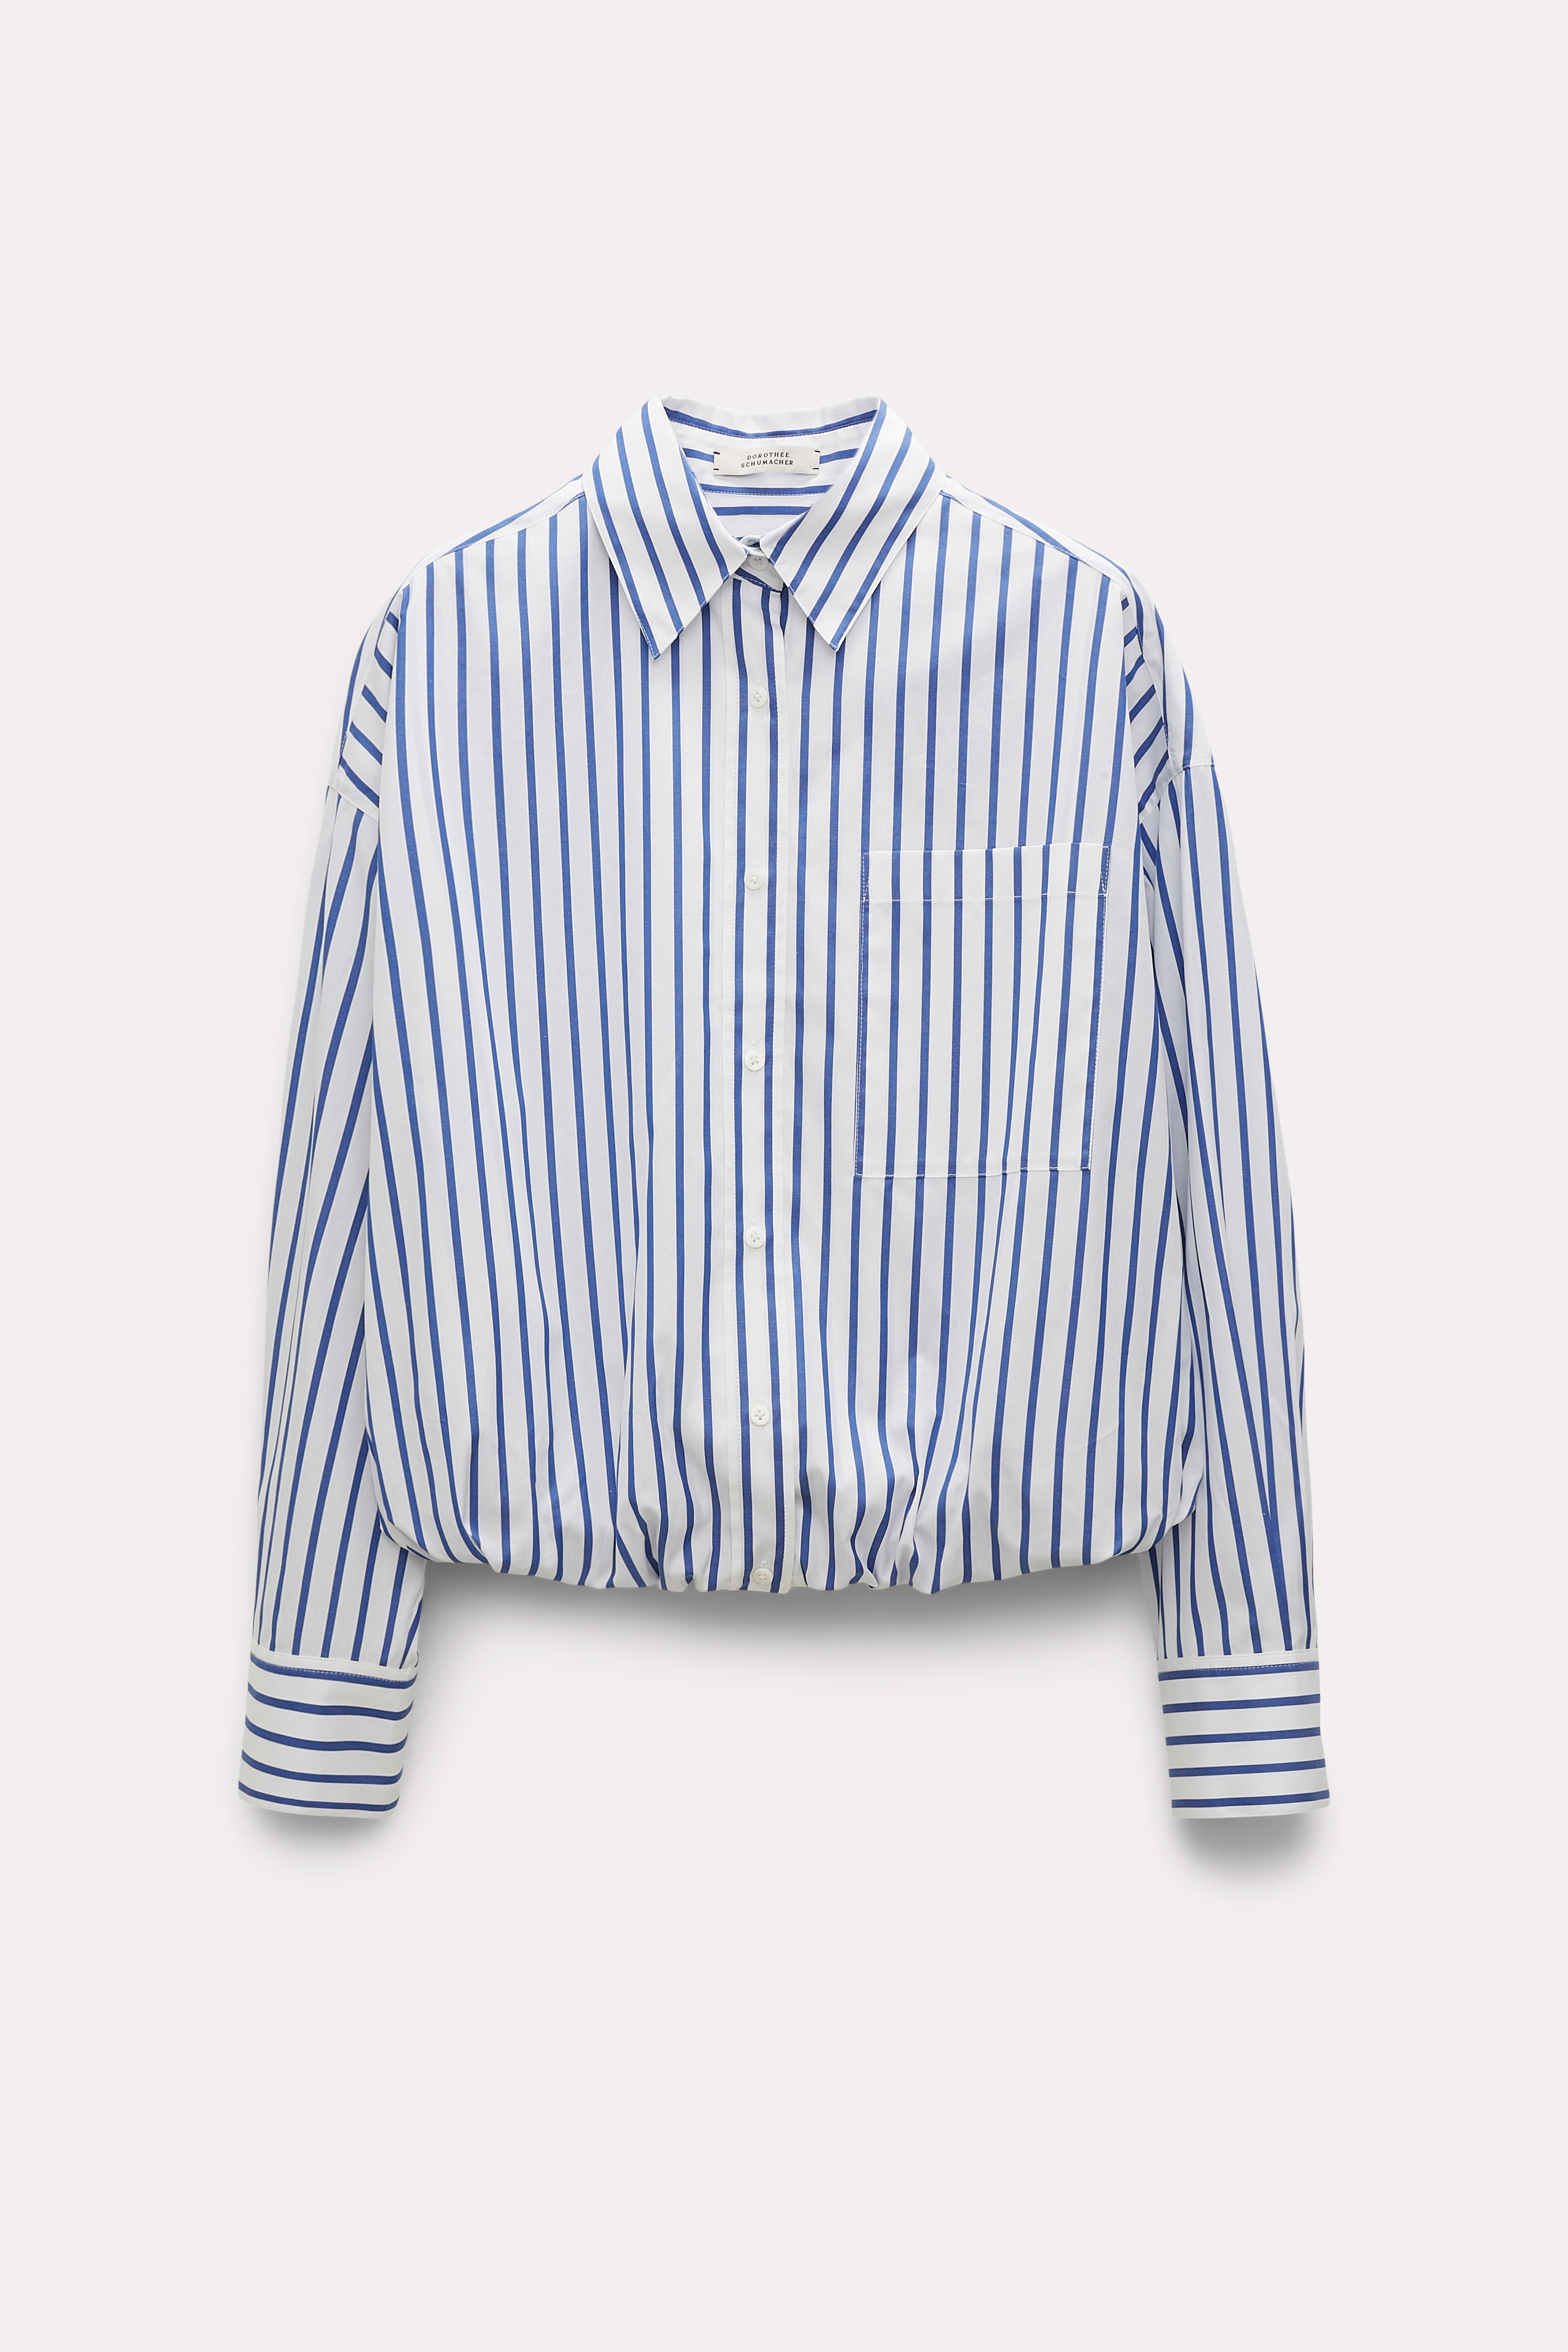 Dorothee Schumacher Striped Cotton Shirt With Balloon Hem In Multi Colour